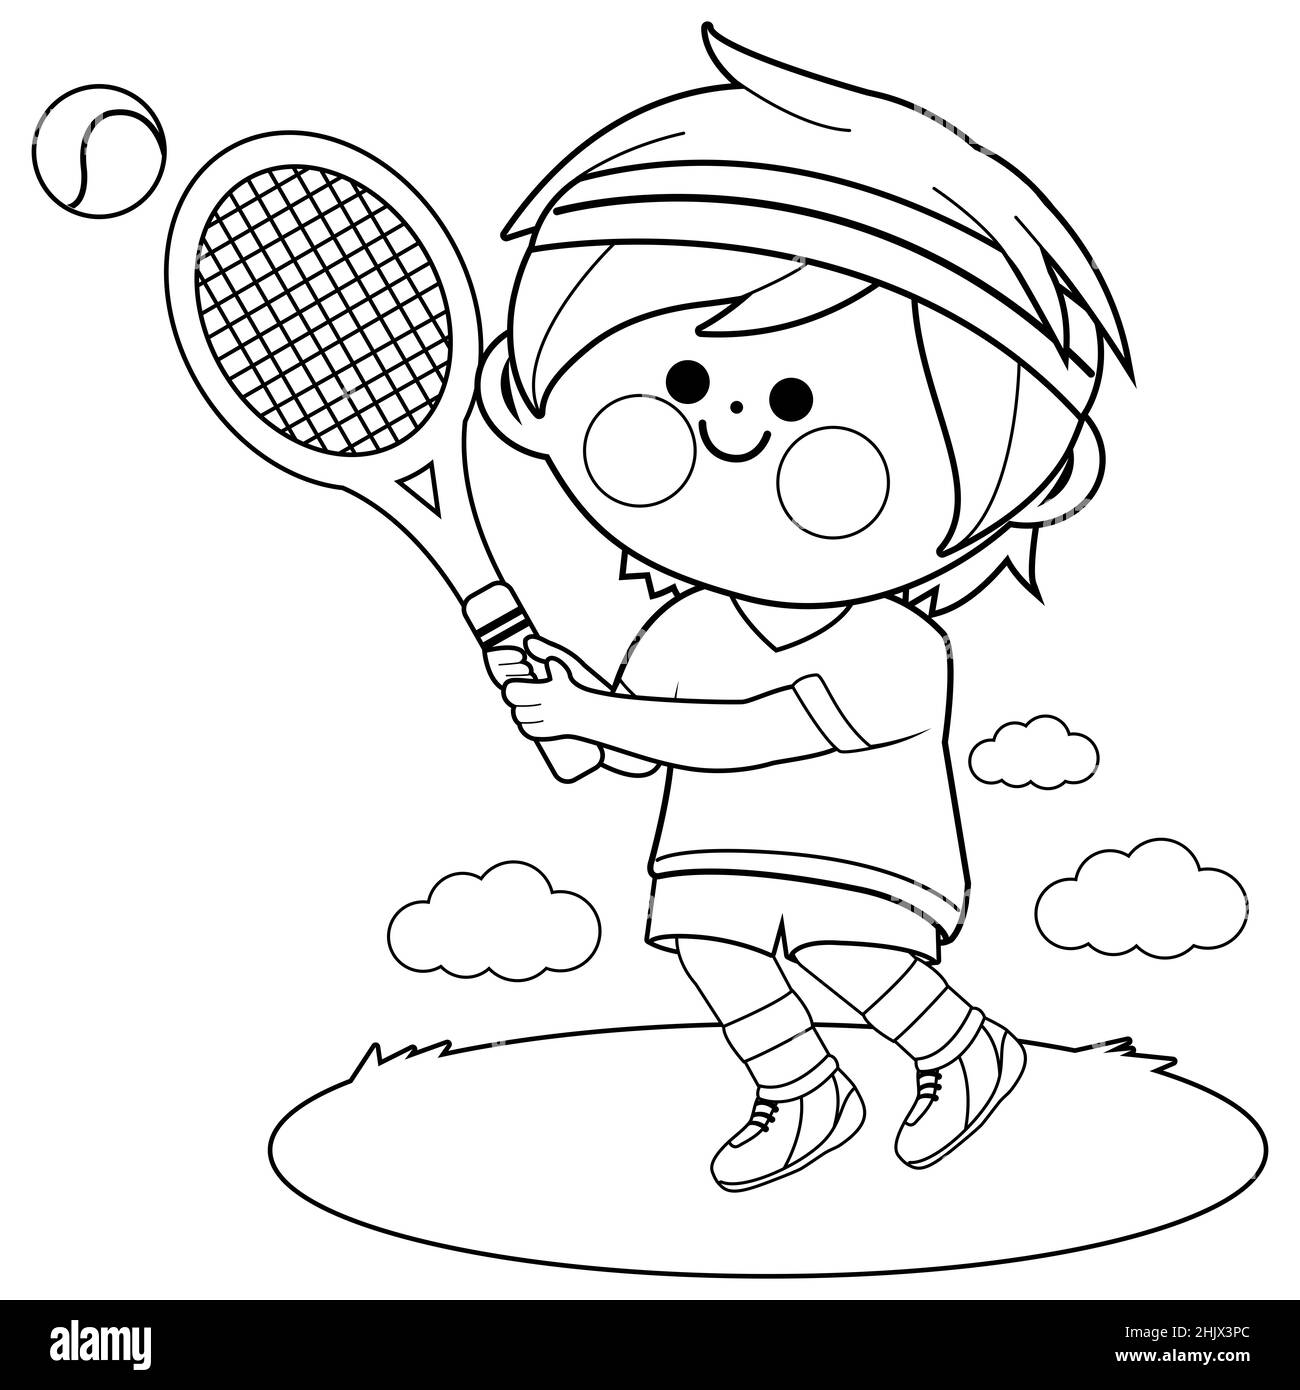 Child playing tennis Black and White Stock Photos & Images - Alamy